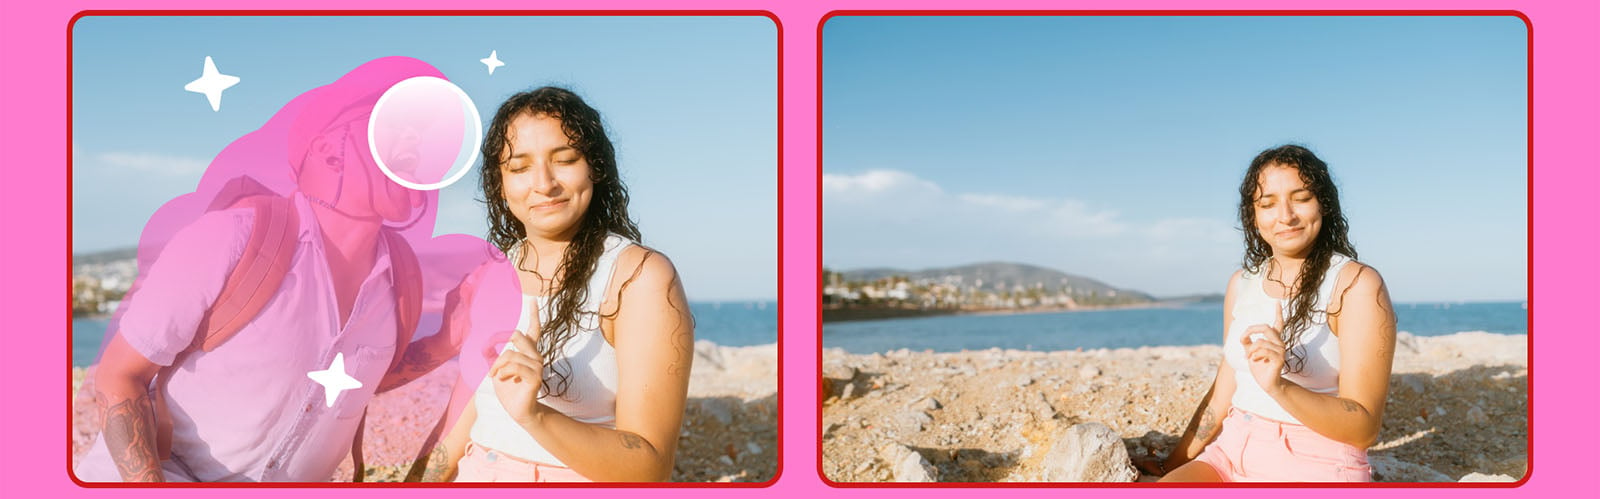 Two images side by side of a woman on a sunny beach; left image obscured by star and circle shapes, right image shows her meditating with closed eyes and a serene expression.